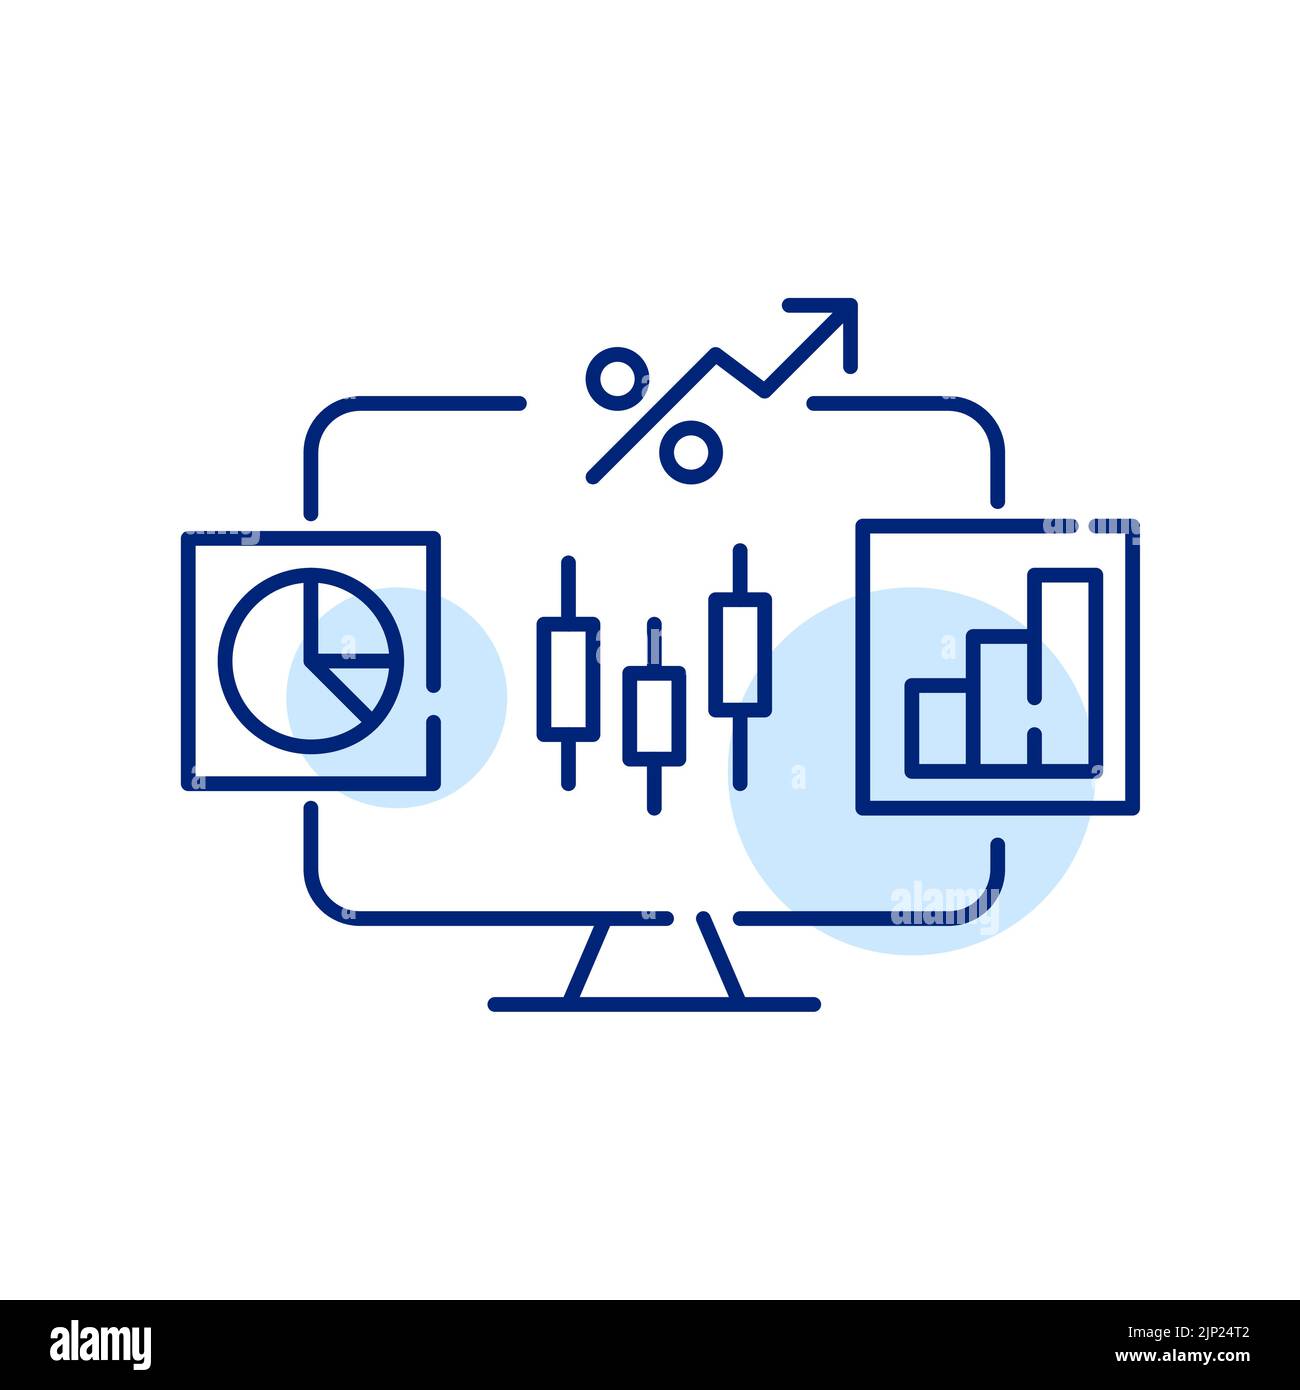 Stock trading platform with candlestick and pie charts. Pixel perfect, editable stroke line art icon Stock Vector